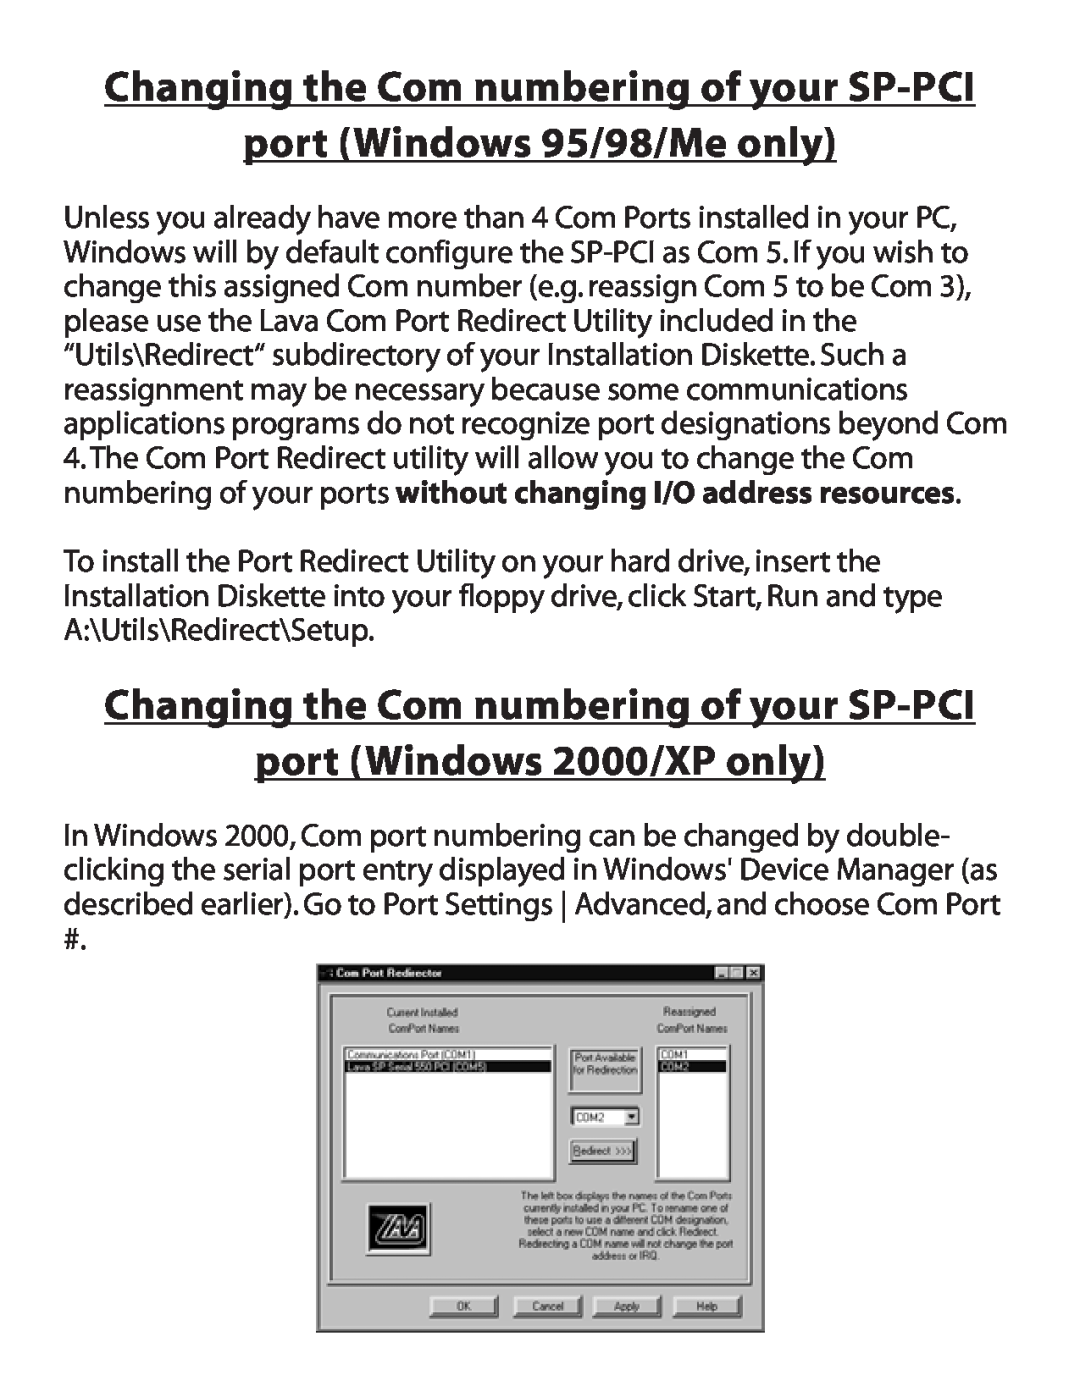 Lava Computer installation manual Changing the Com numbering of your SP-PCI port Windows 95/98/Me only 